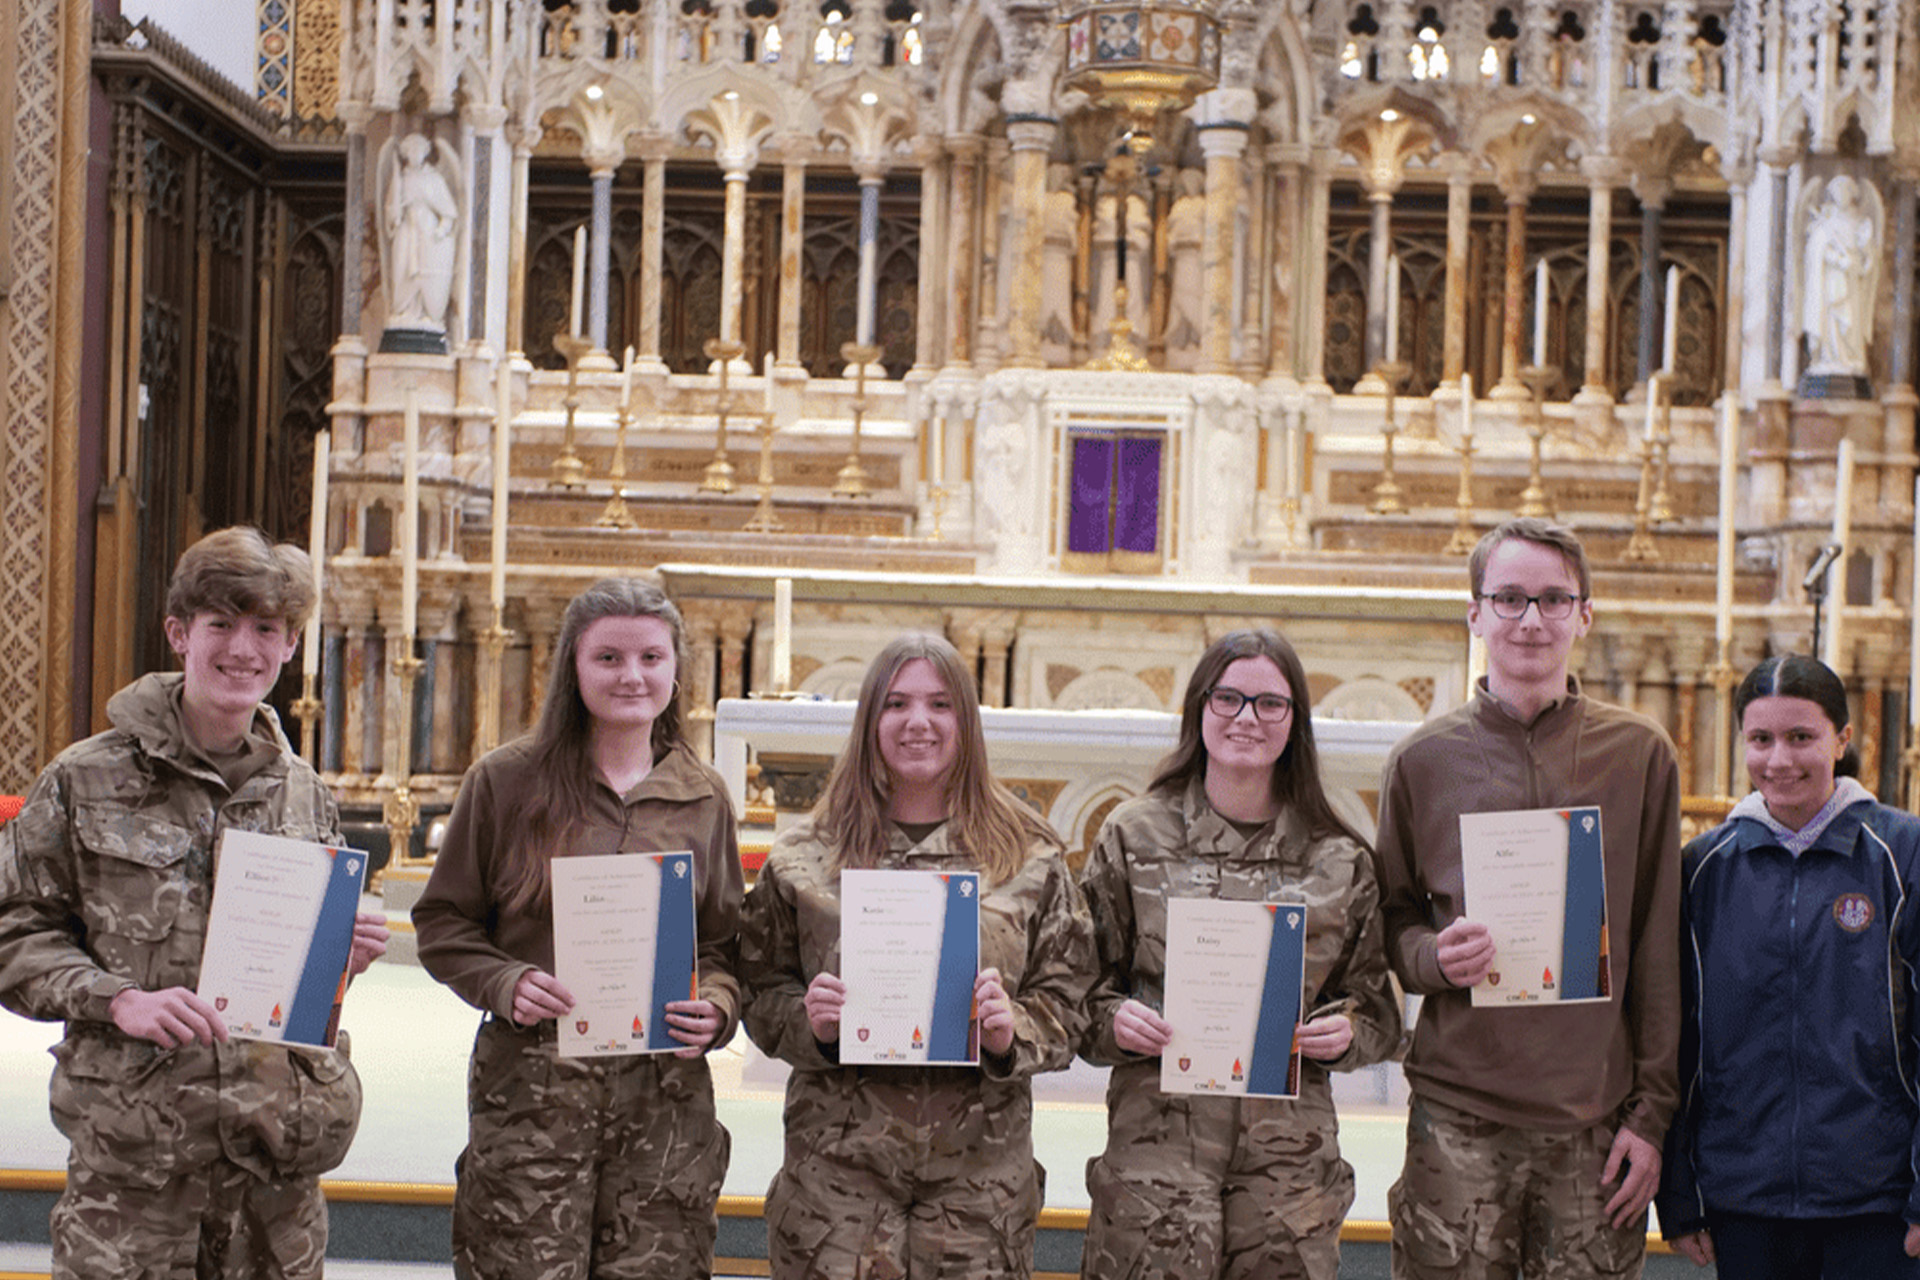 Stonyhurst pupils with their Faith in Action Gold Awards